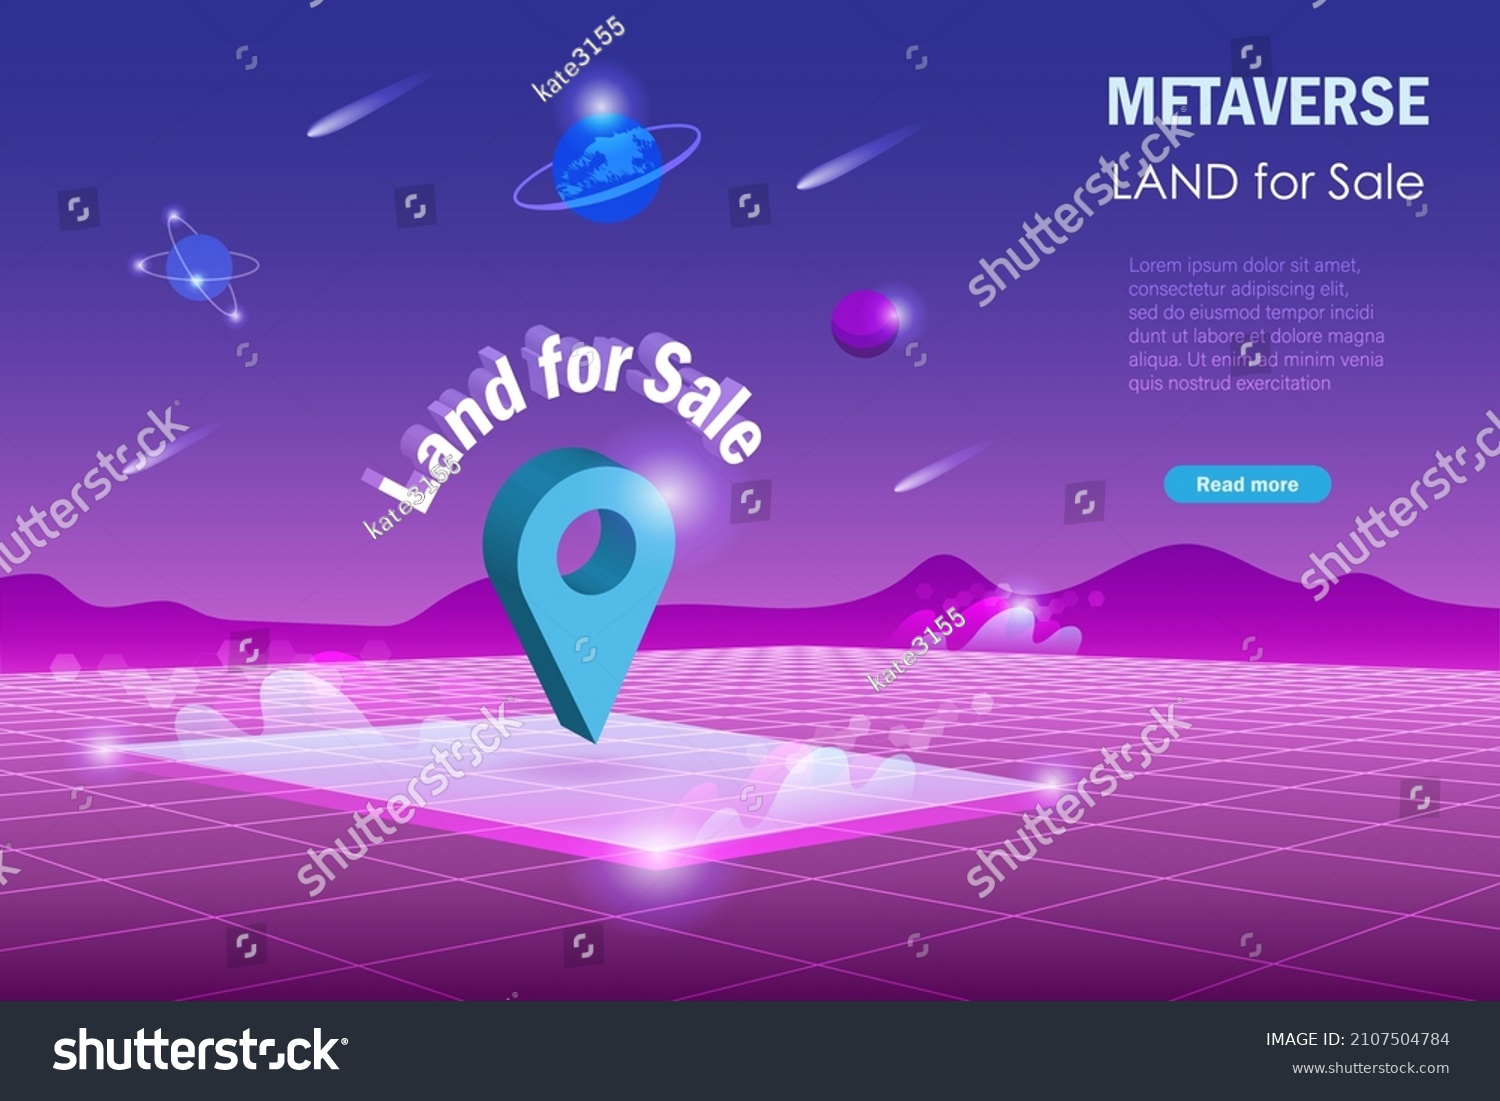 Metaverse land for sale, digital real estate and property investment technology.  Virtual reality land for sale with pin point in cyber space futuristic environment background. #2107504784